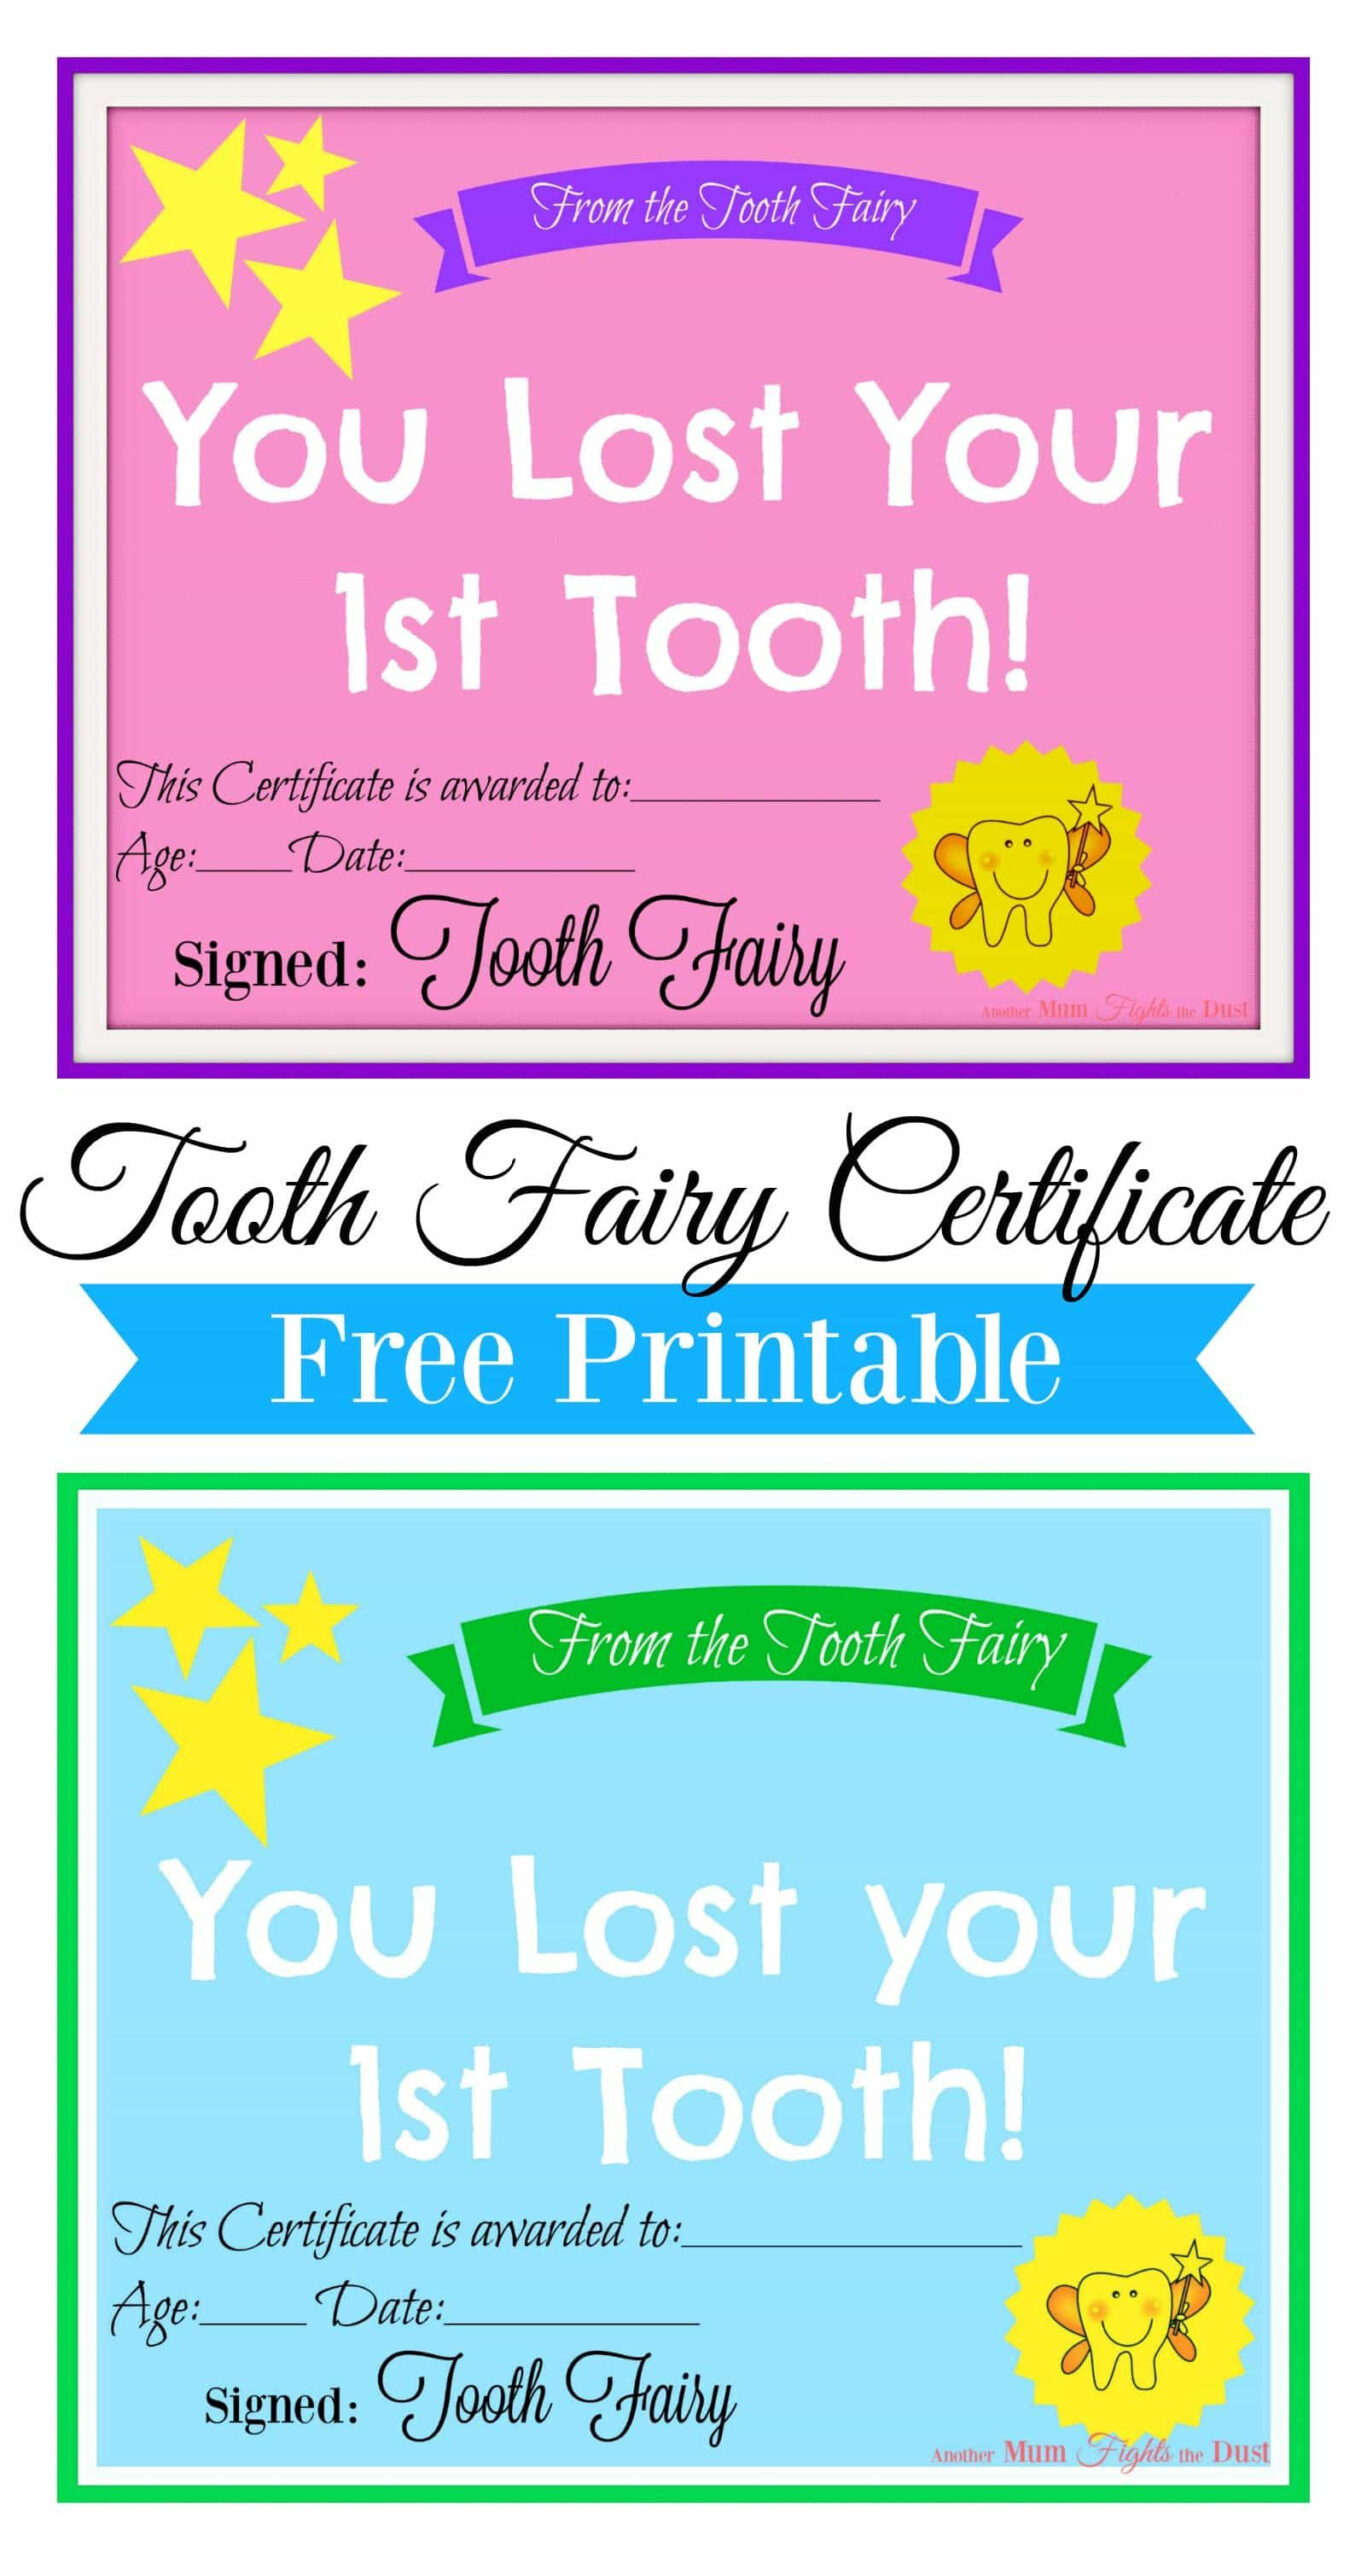 Free Printable Tooth Fairy Certificate in Free Printable First Lost Tooth Certificate